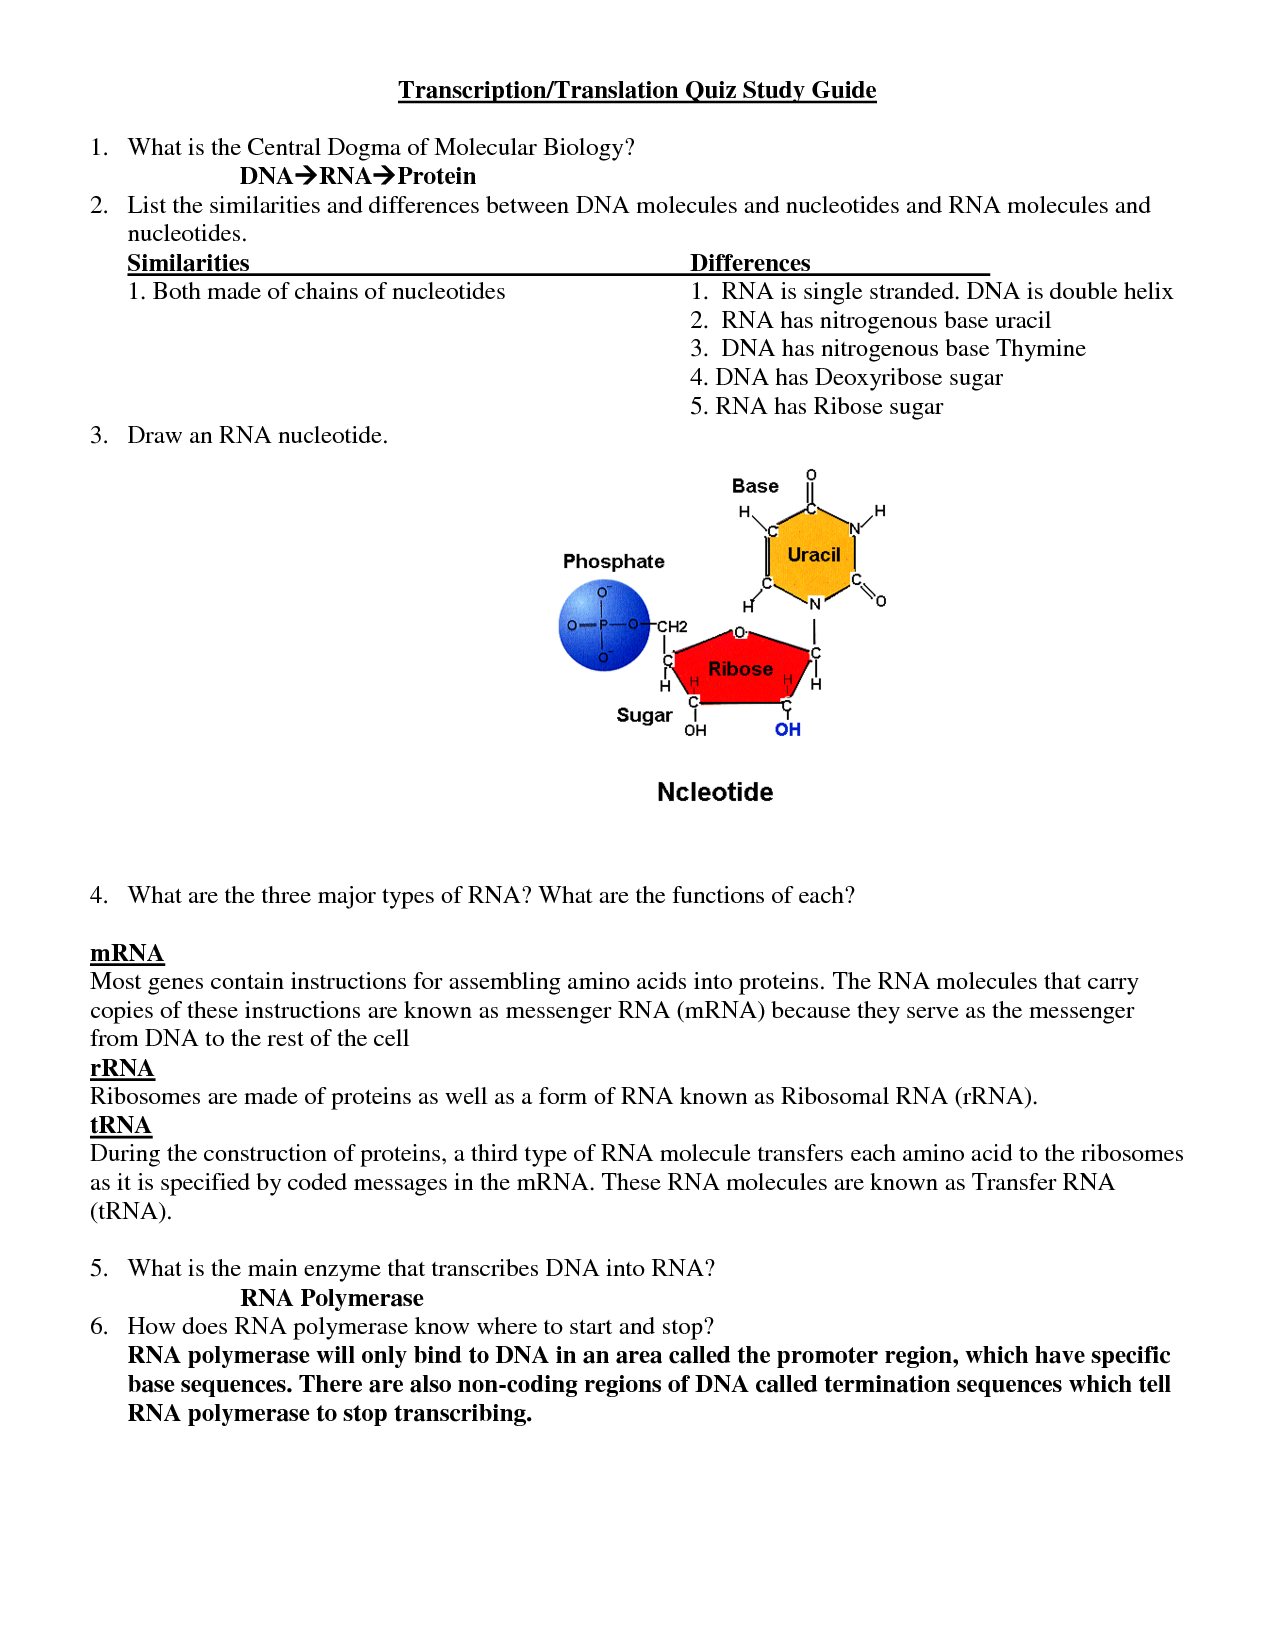 14-best-images-of-comparing-dna-and-rna-worksheet-section-12-4-mutations-answer-key